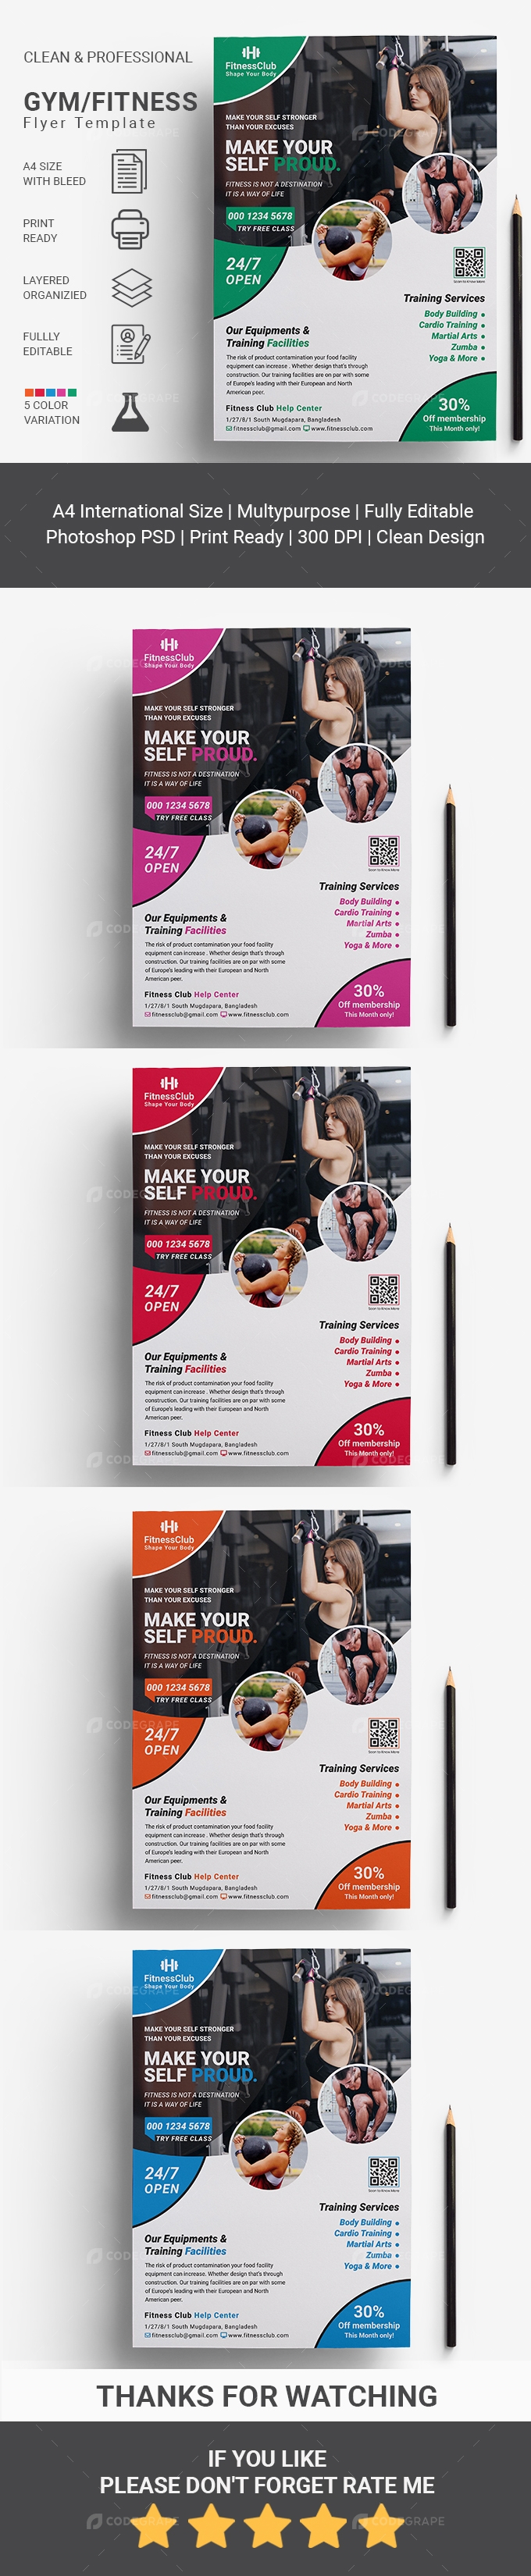 Health & Fitness Flyer Template